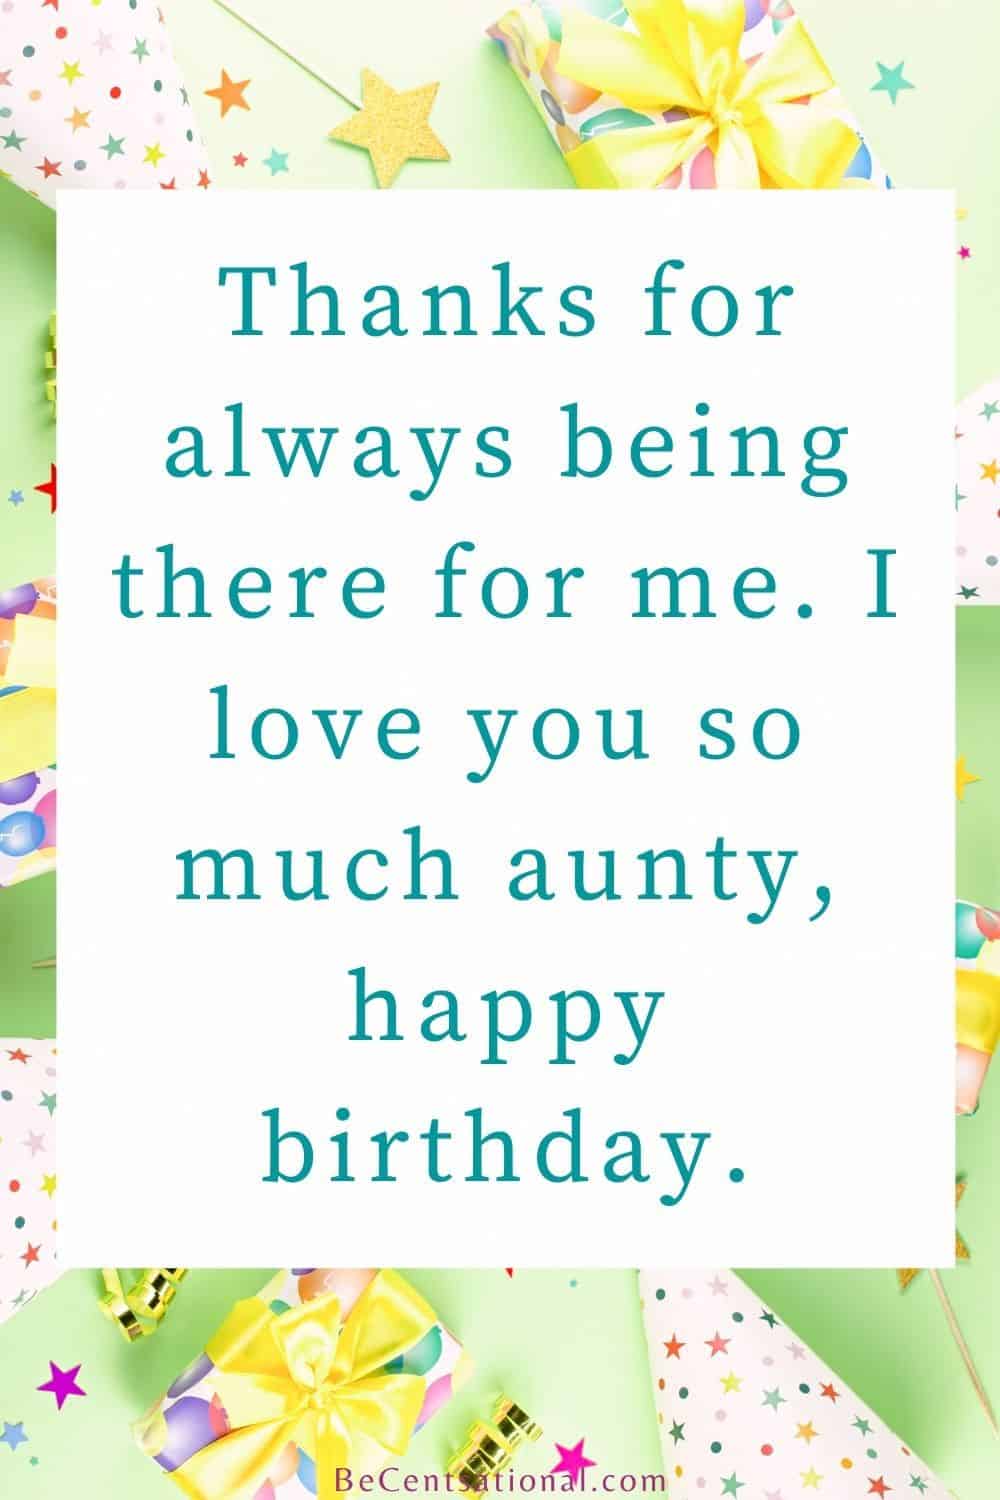 50 Heart Touching Birthday Wishes for Aunt - Be Centsational